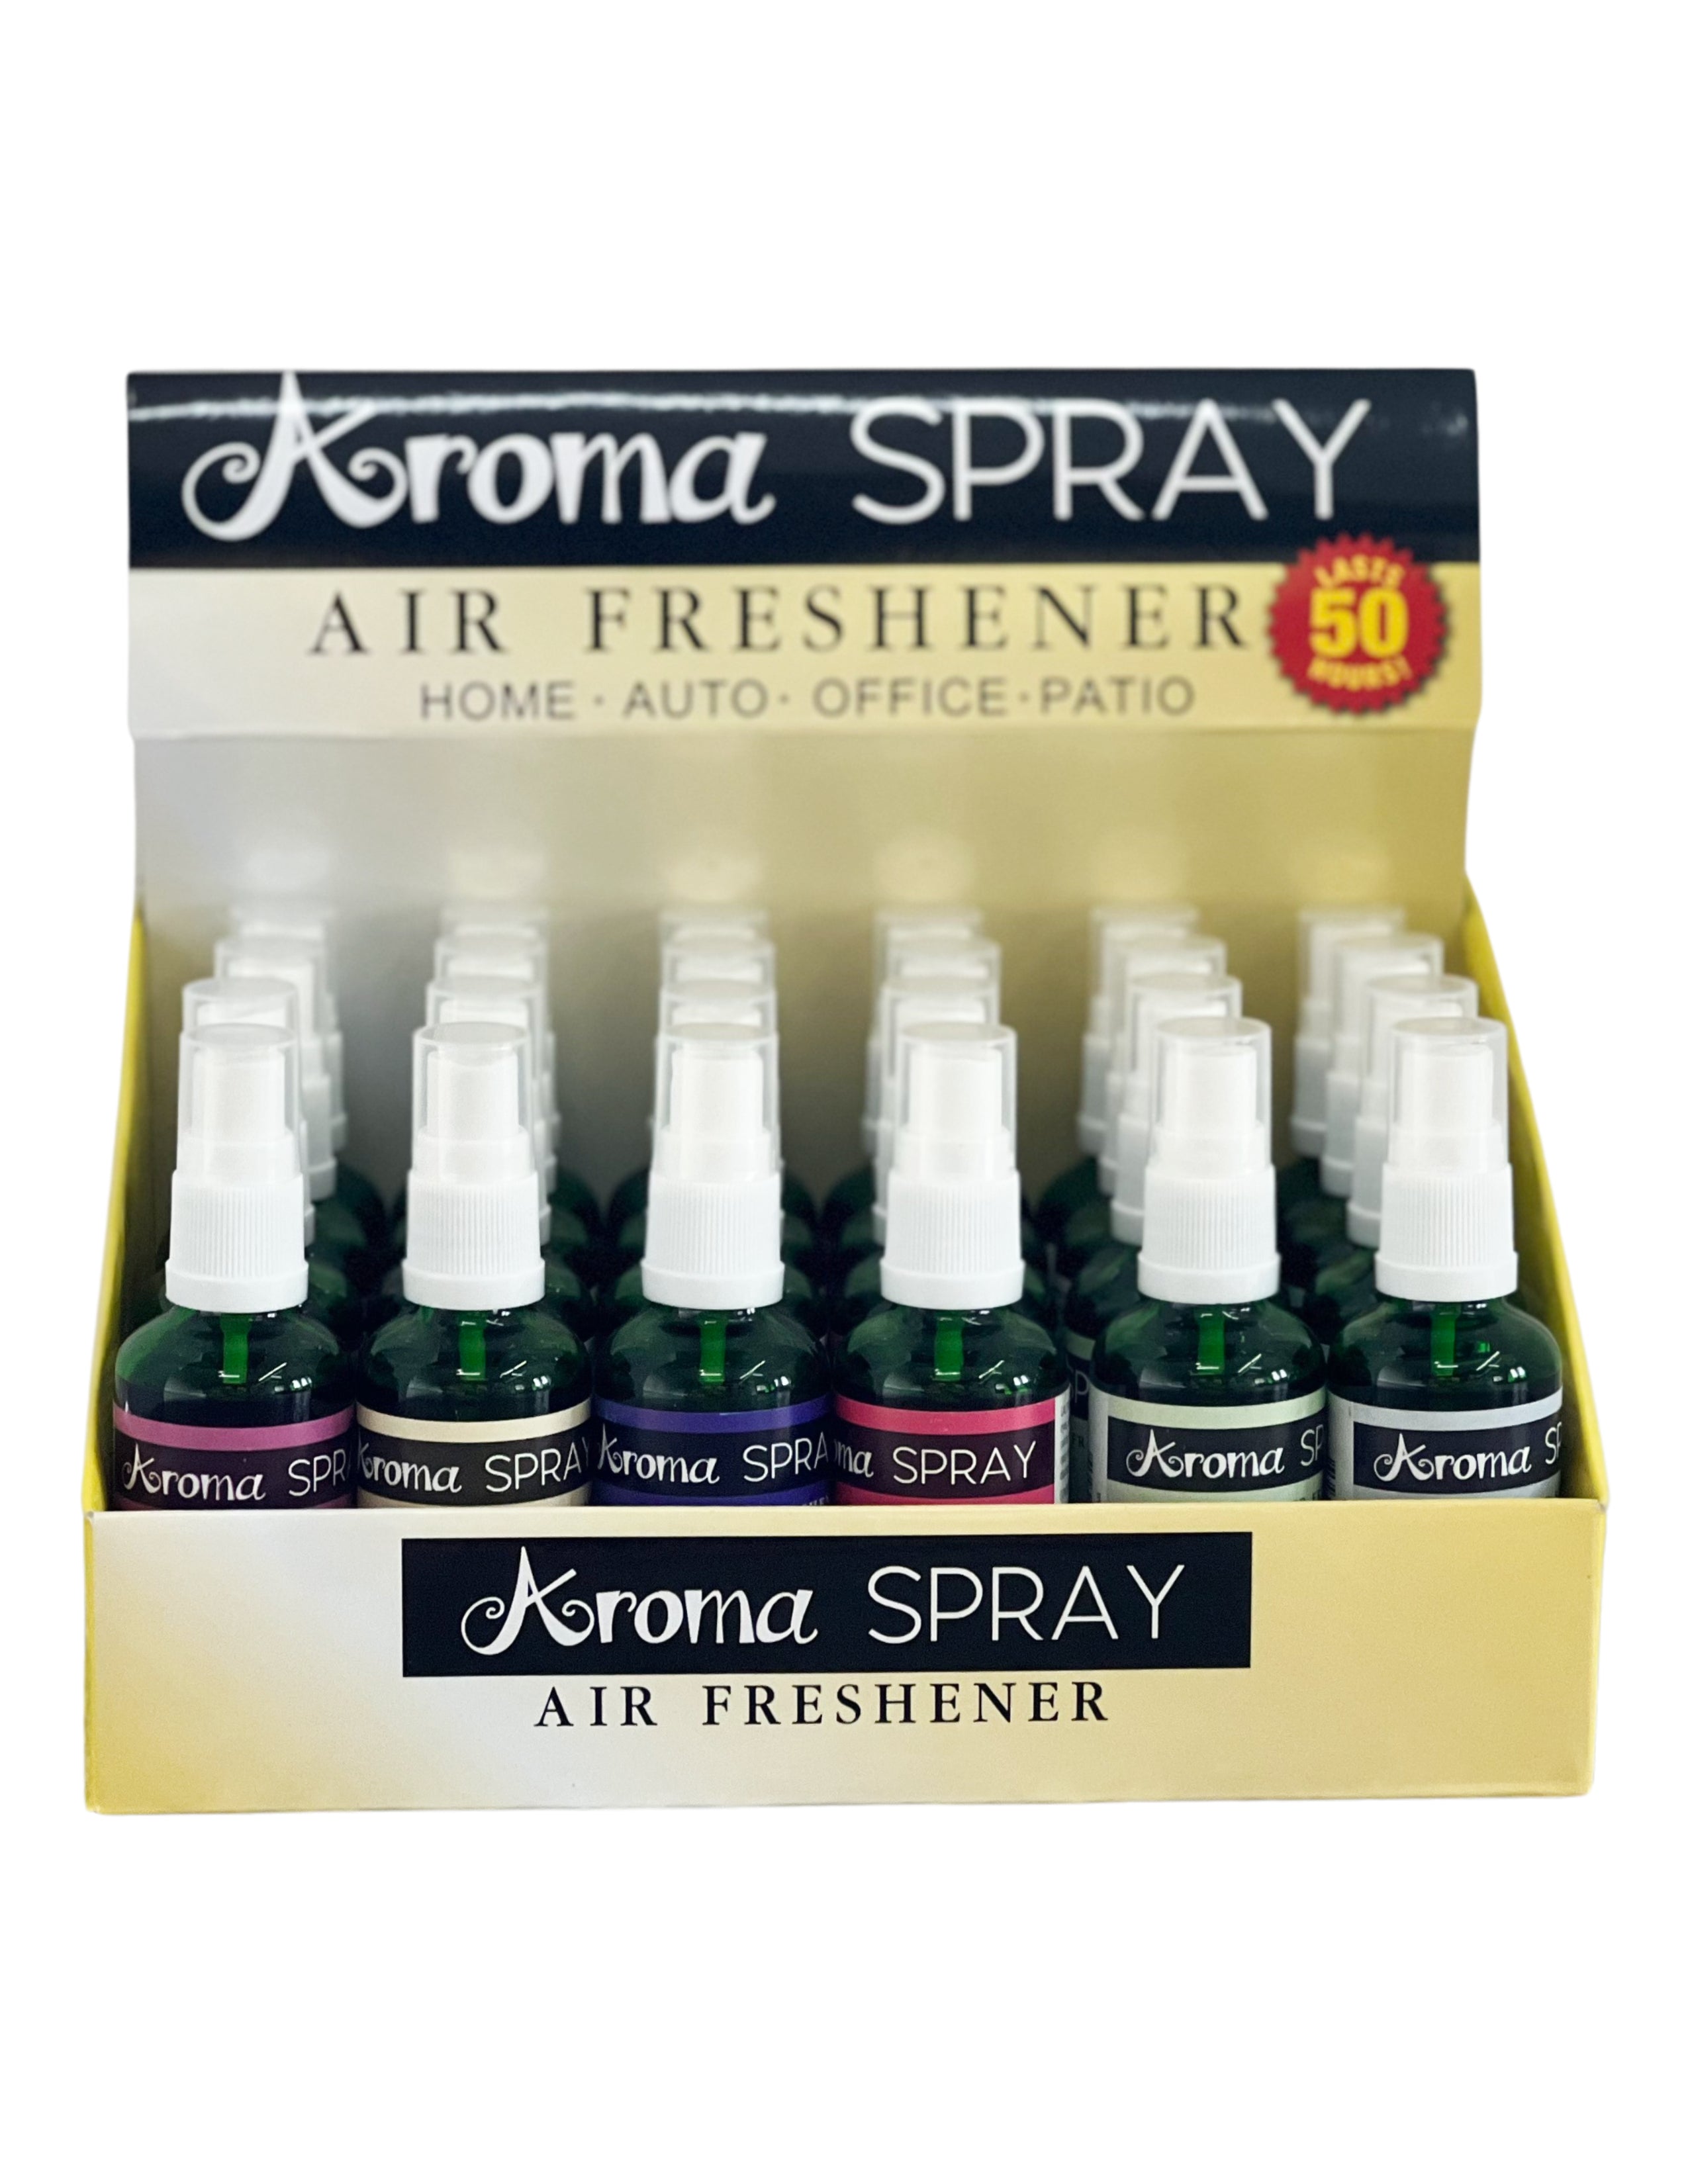 Aroma Spray "Assorted Packing A" (24 Count)